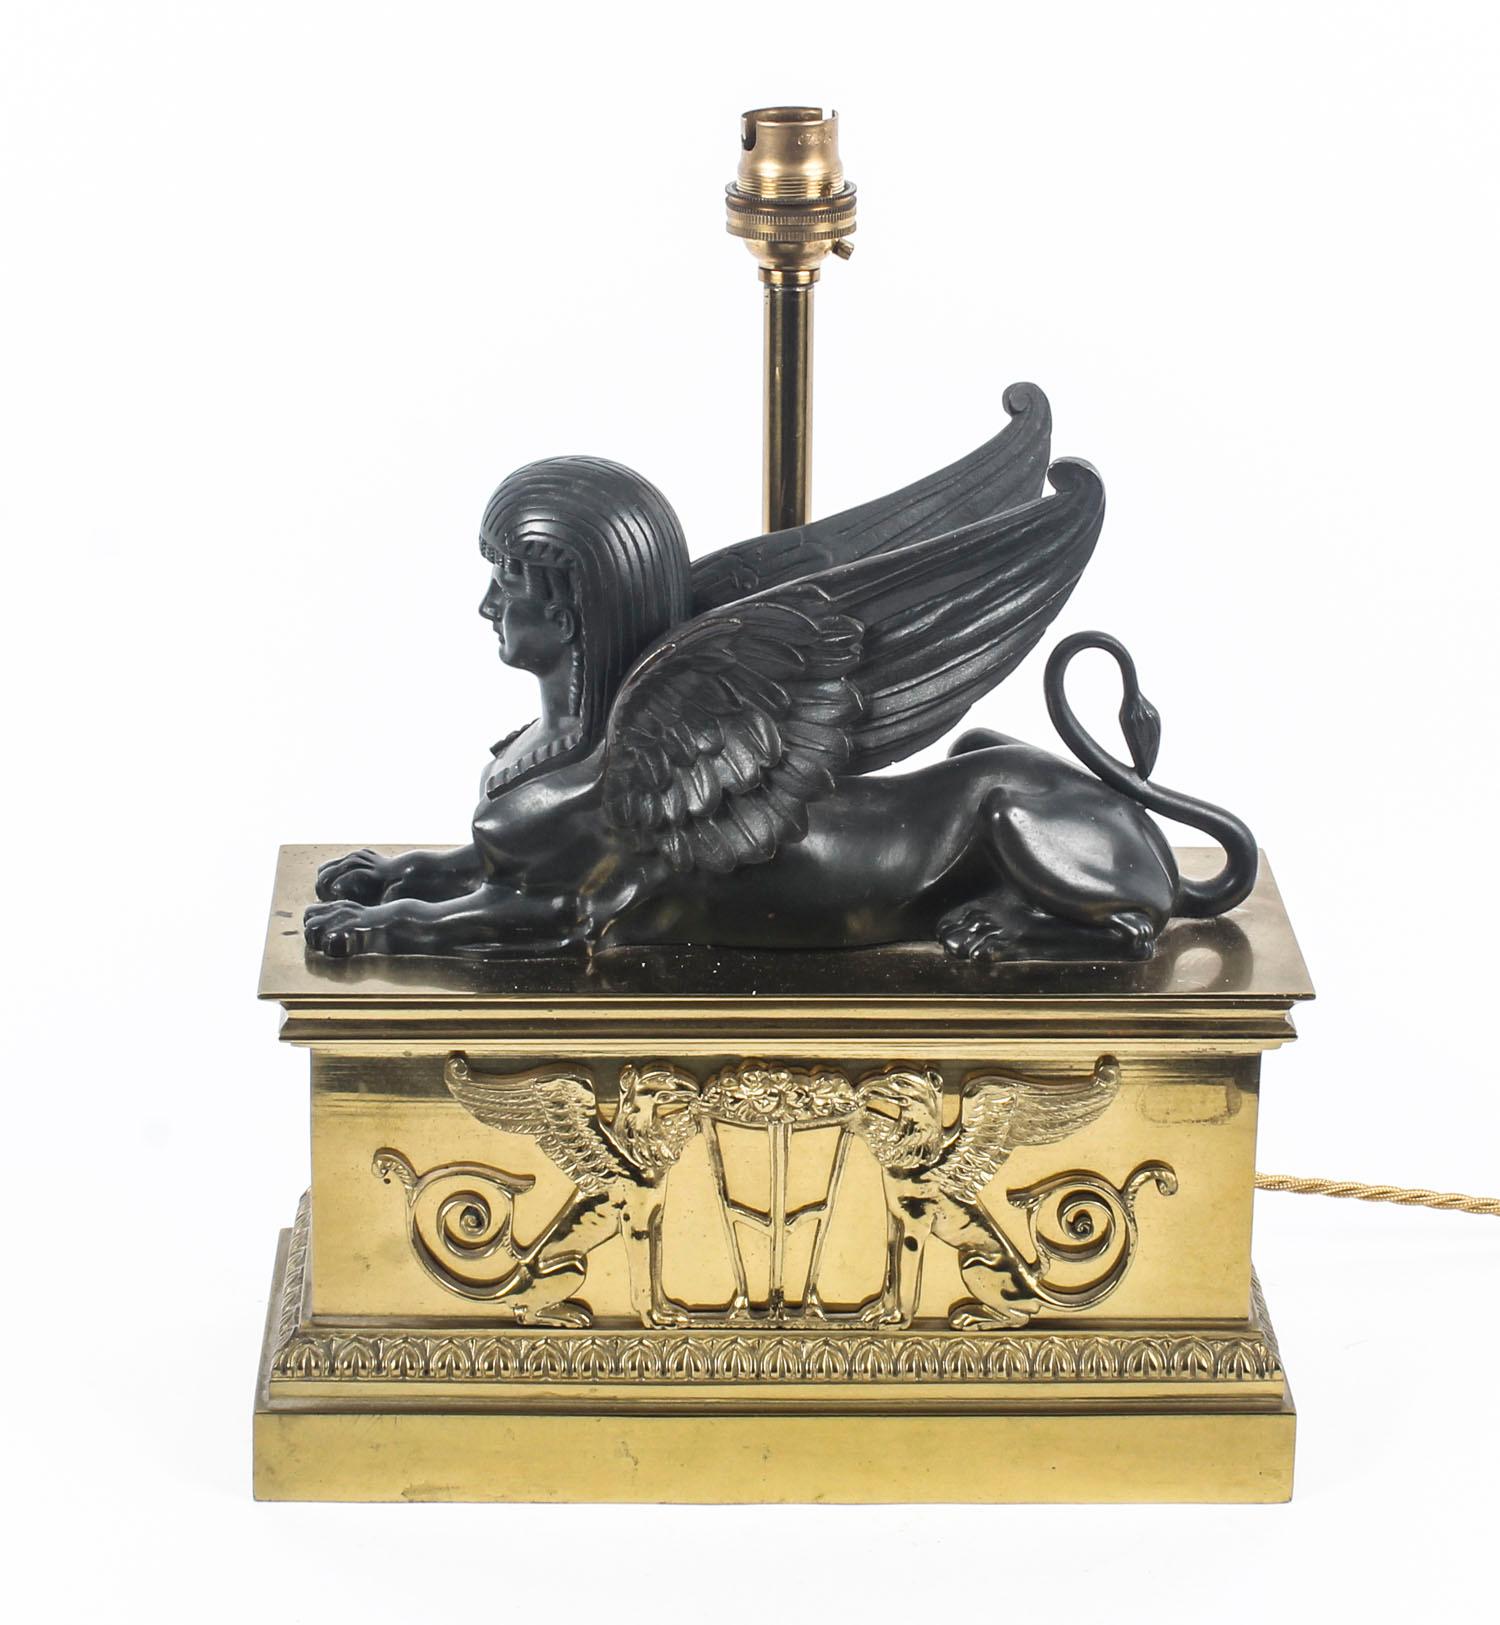 This is a truly superb antique French Empire period Egyptian Revival patinated bronze modeled as a recumbent winged sphinx mounted to an ormolu plinth with applied decoration of griffins flanking a cendrier, circa 1820 in date.

Later converted to